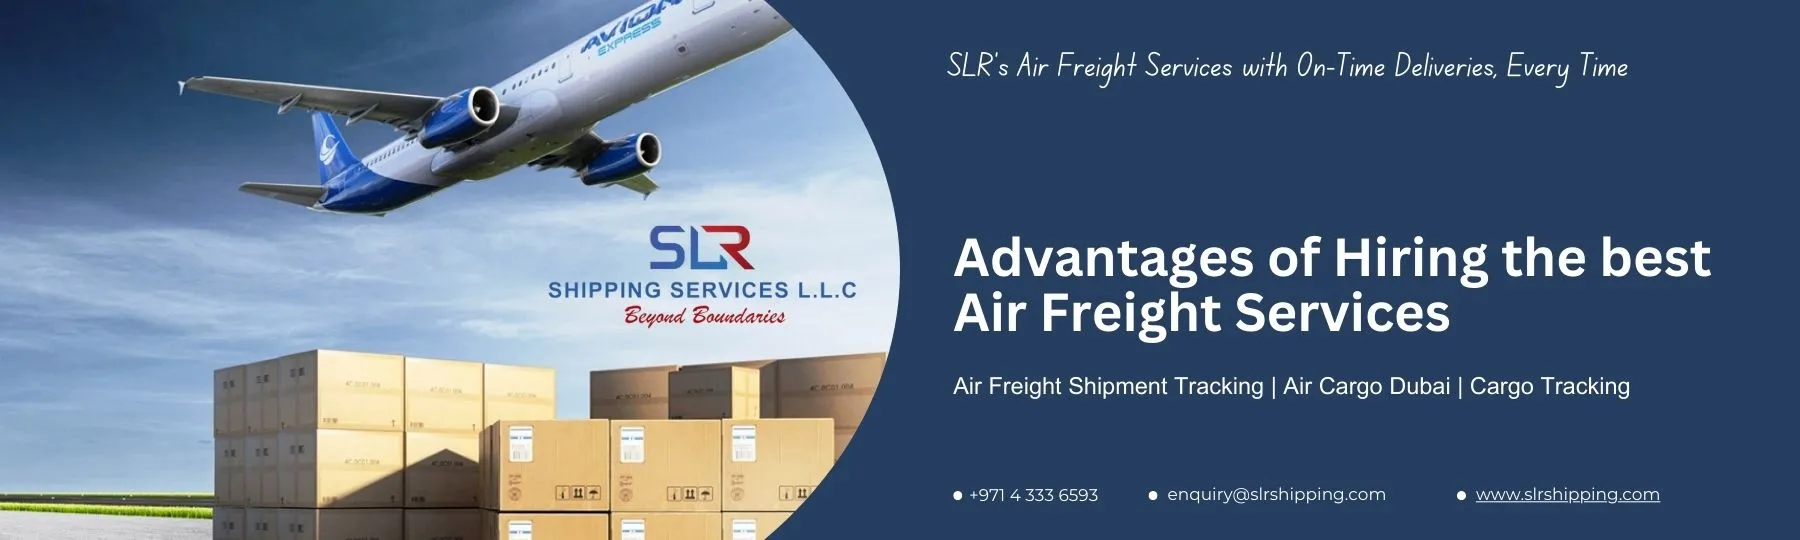 10-Advantages of Hiring the Best Air Freight Service